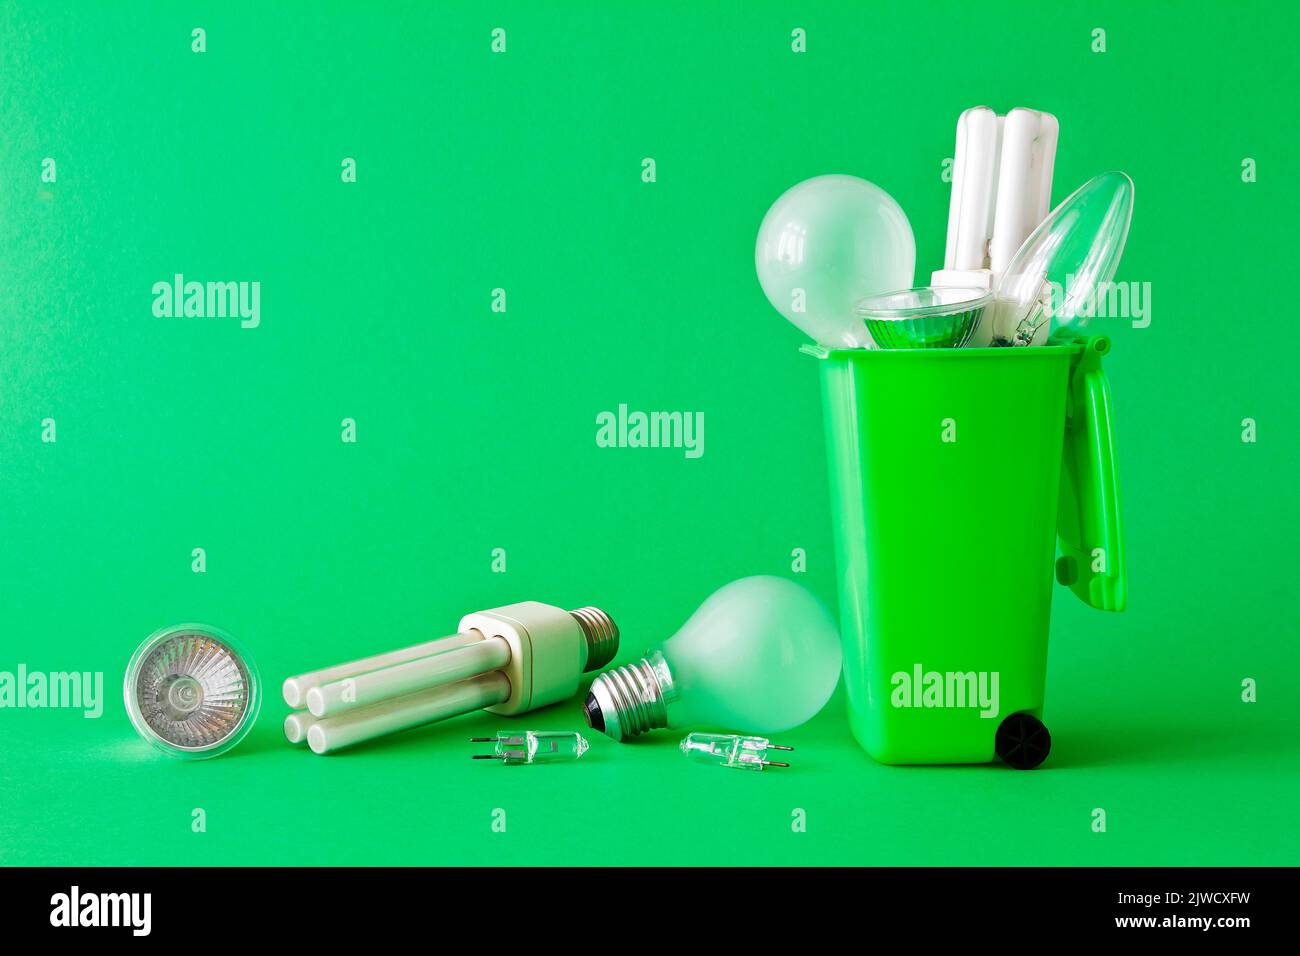 Stop energy waste concept: diverse old halogen and fluorescent light bulbs in and around a recycling bin, green background, text or copy space. Stock Photo